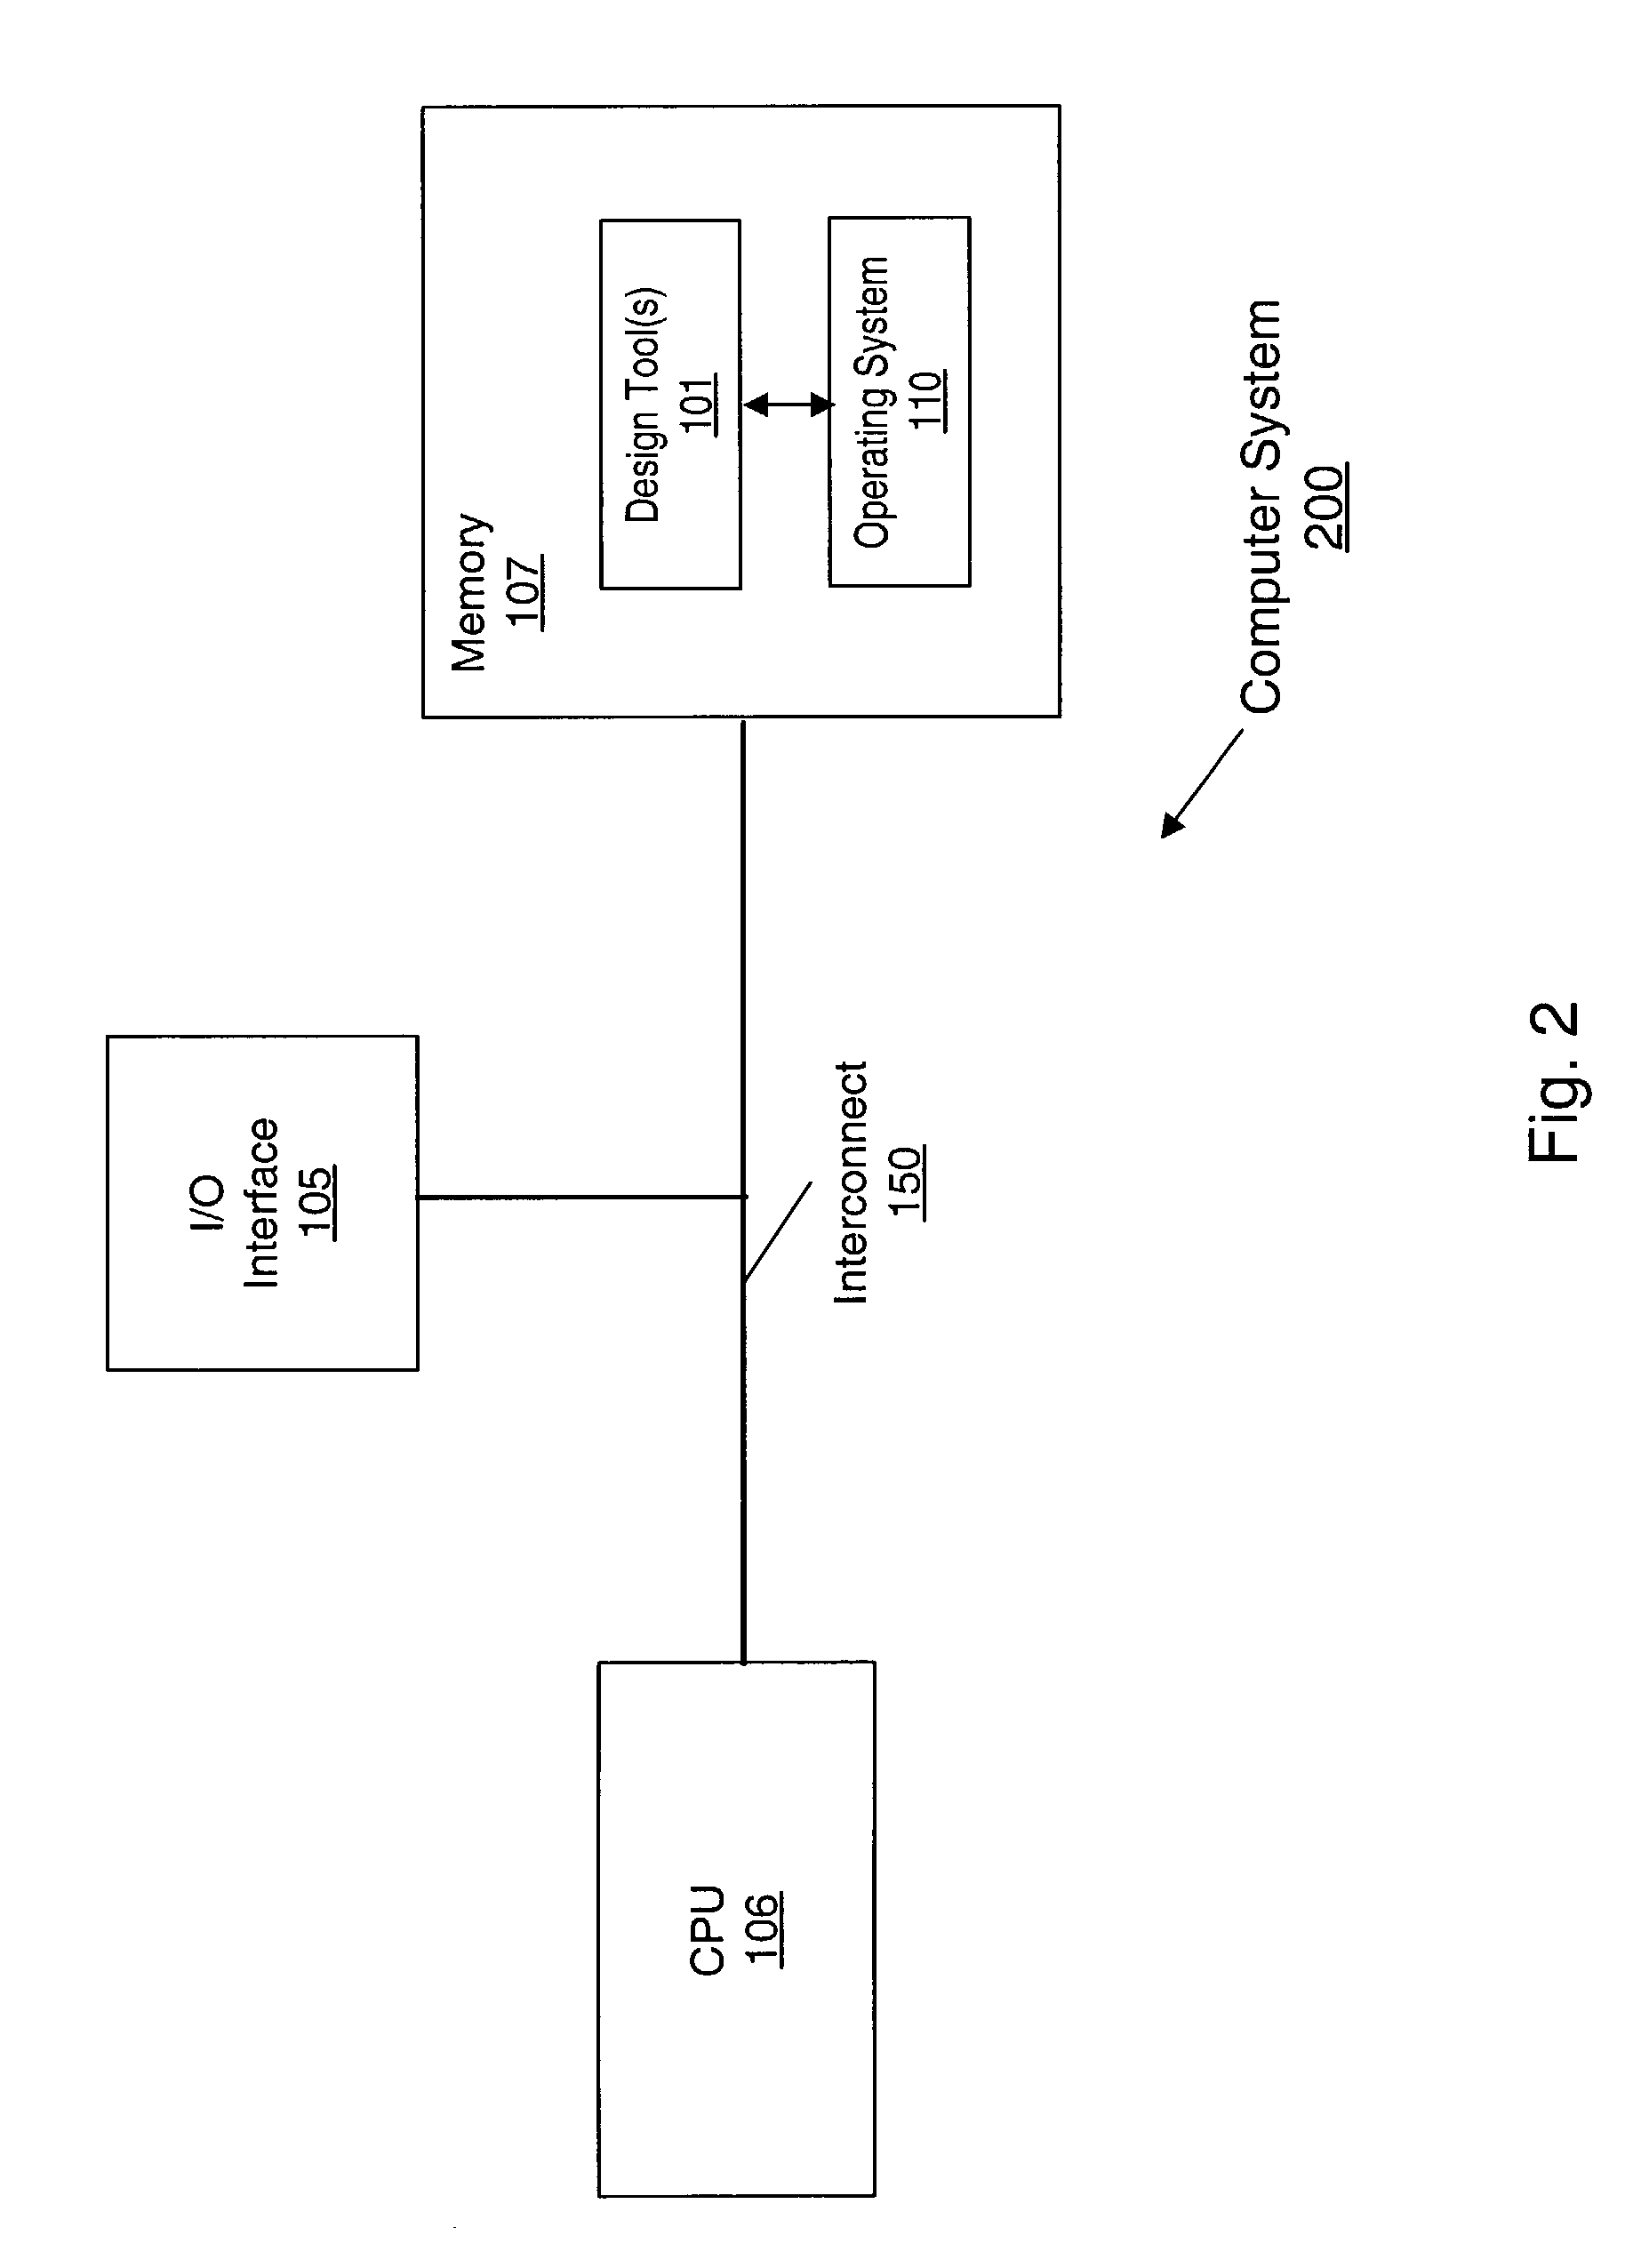 System and method for specifying integrated circuit probe locations